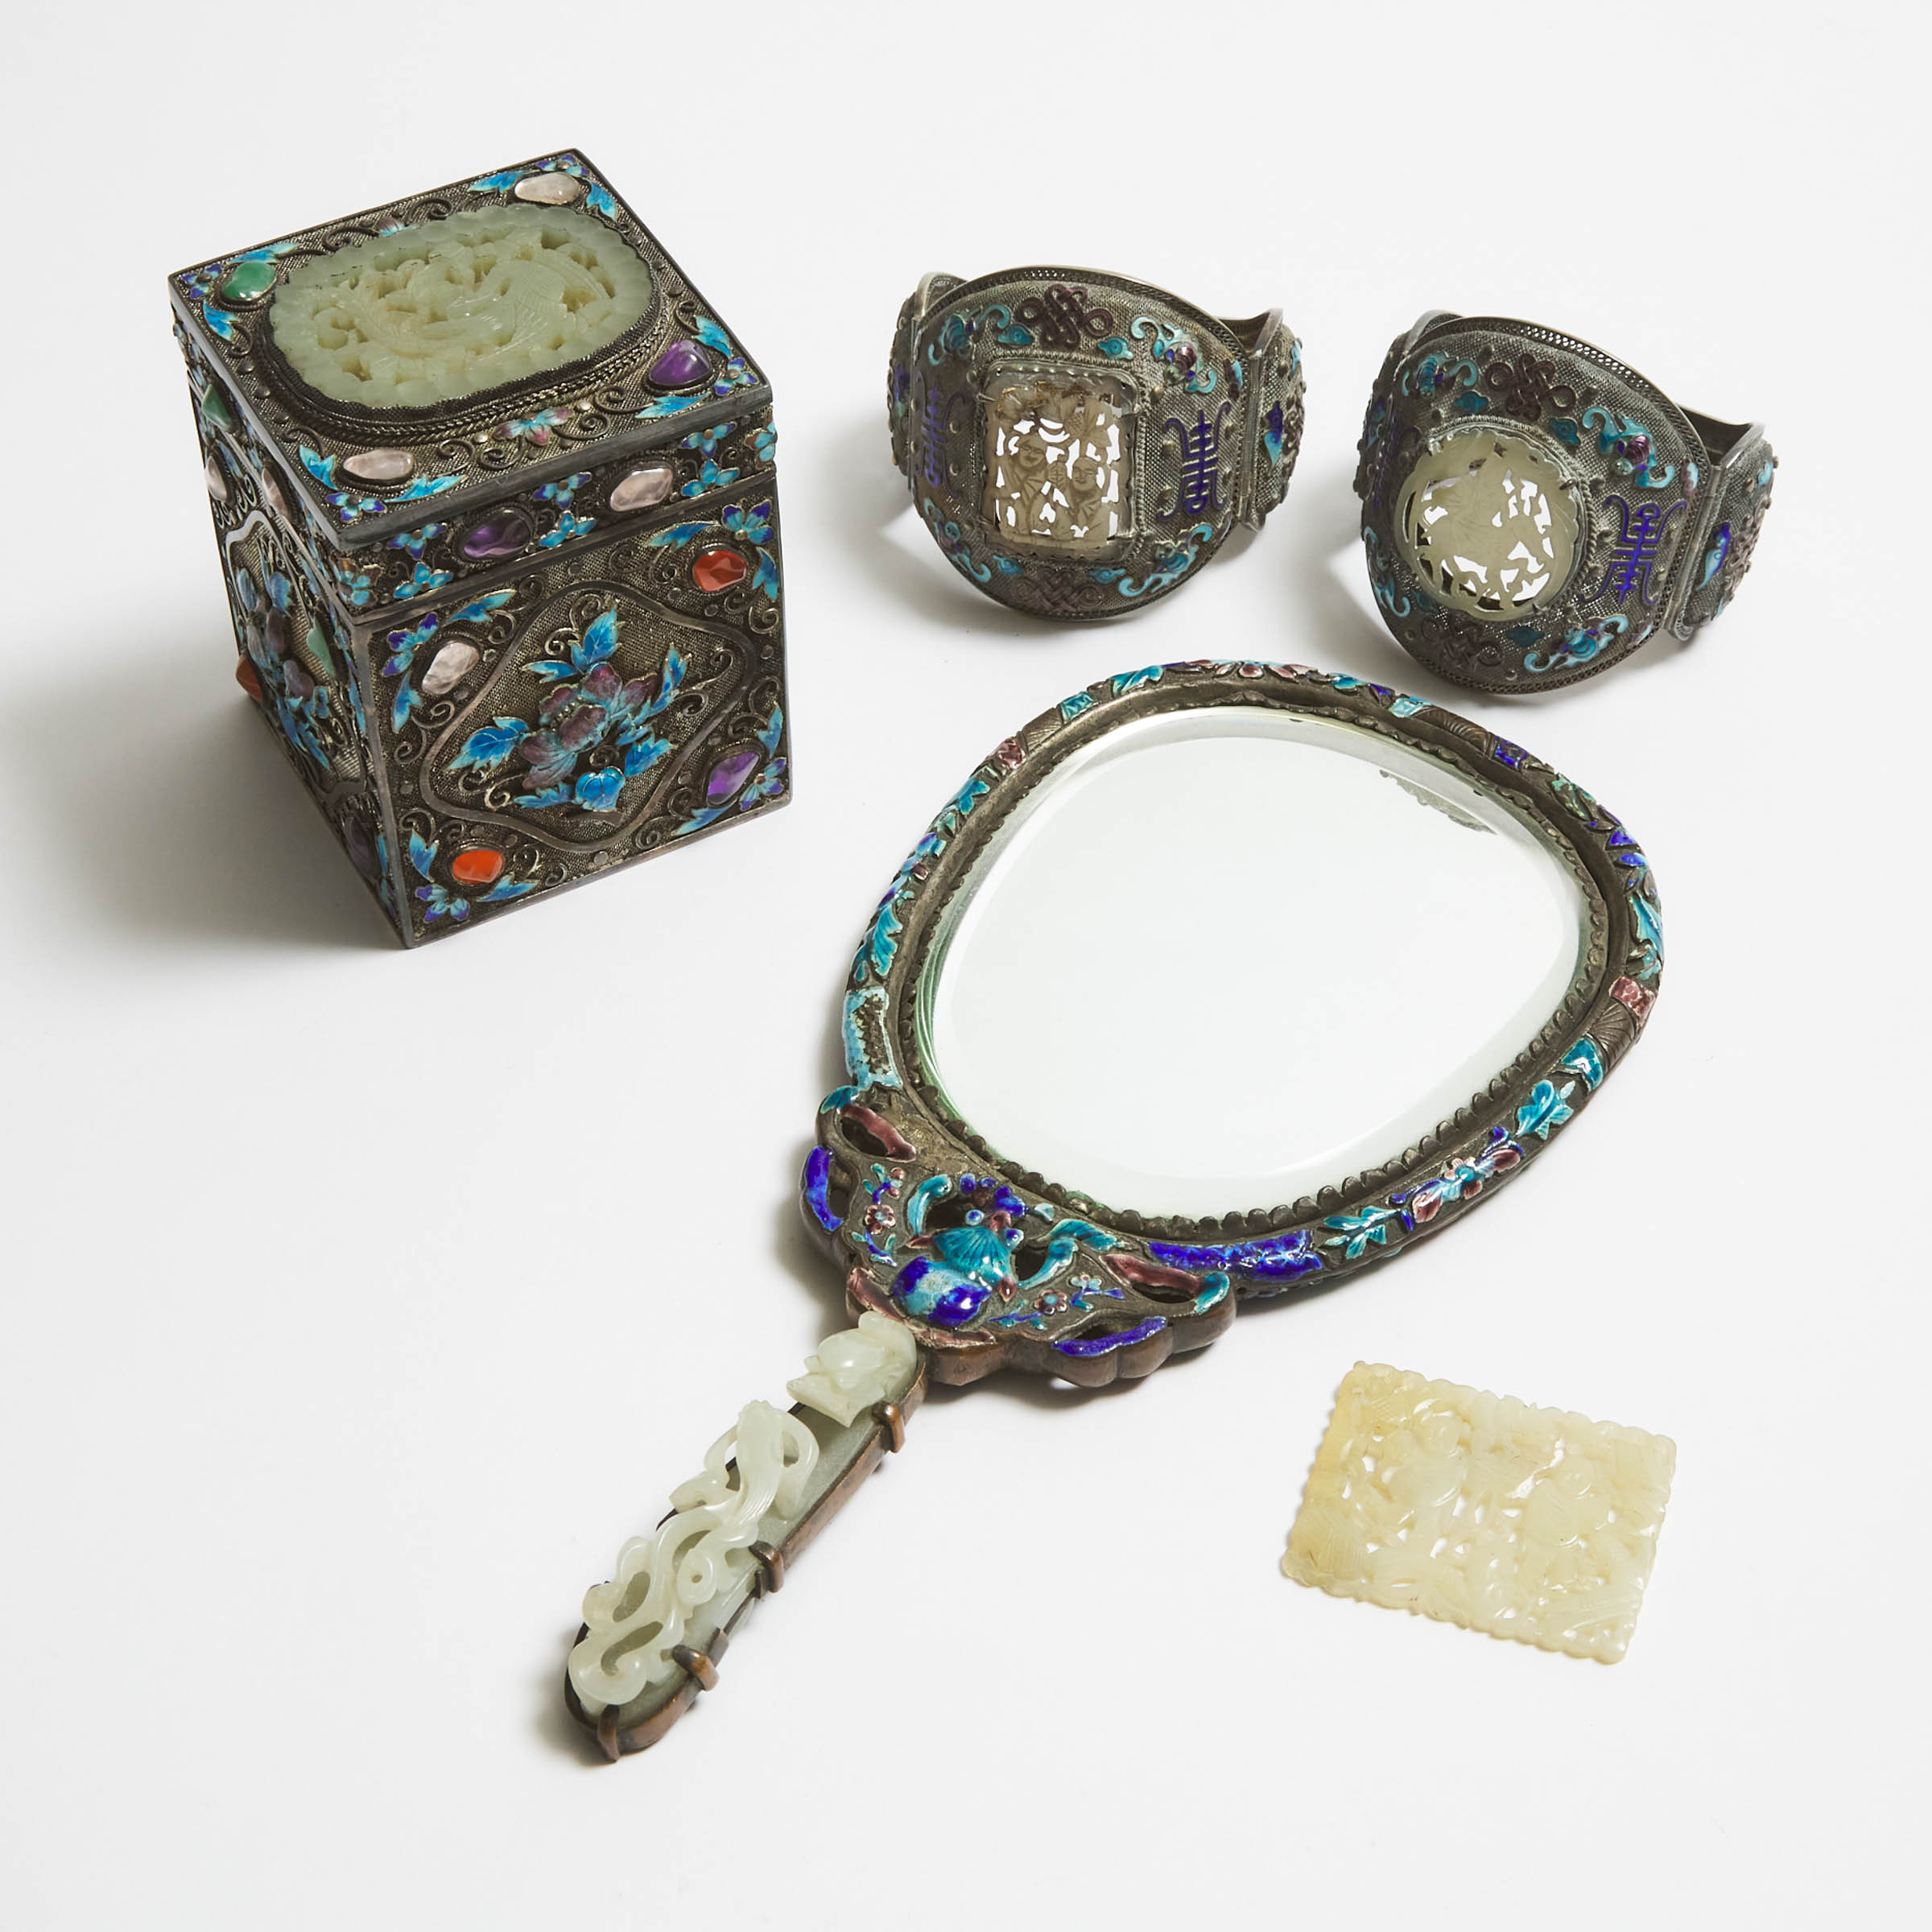 A Group of Five Jade and Silver Filigree Objects, Late Qing Dynasty